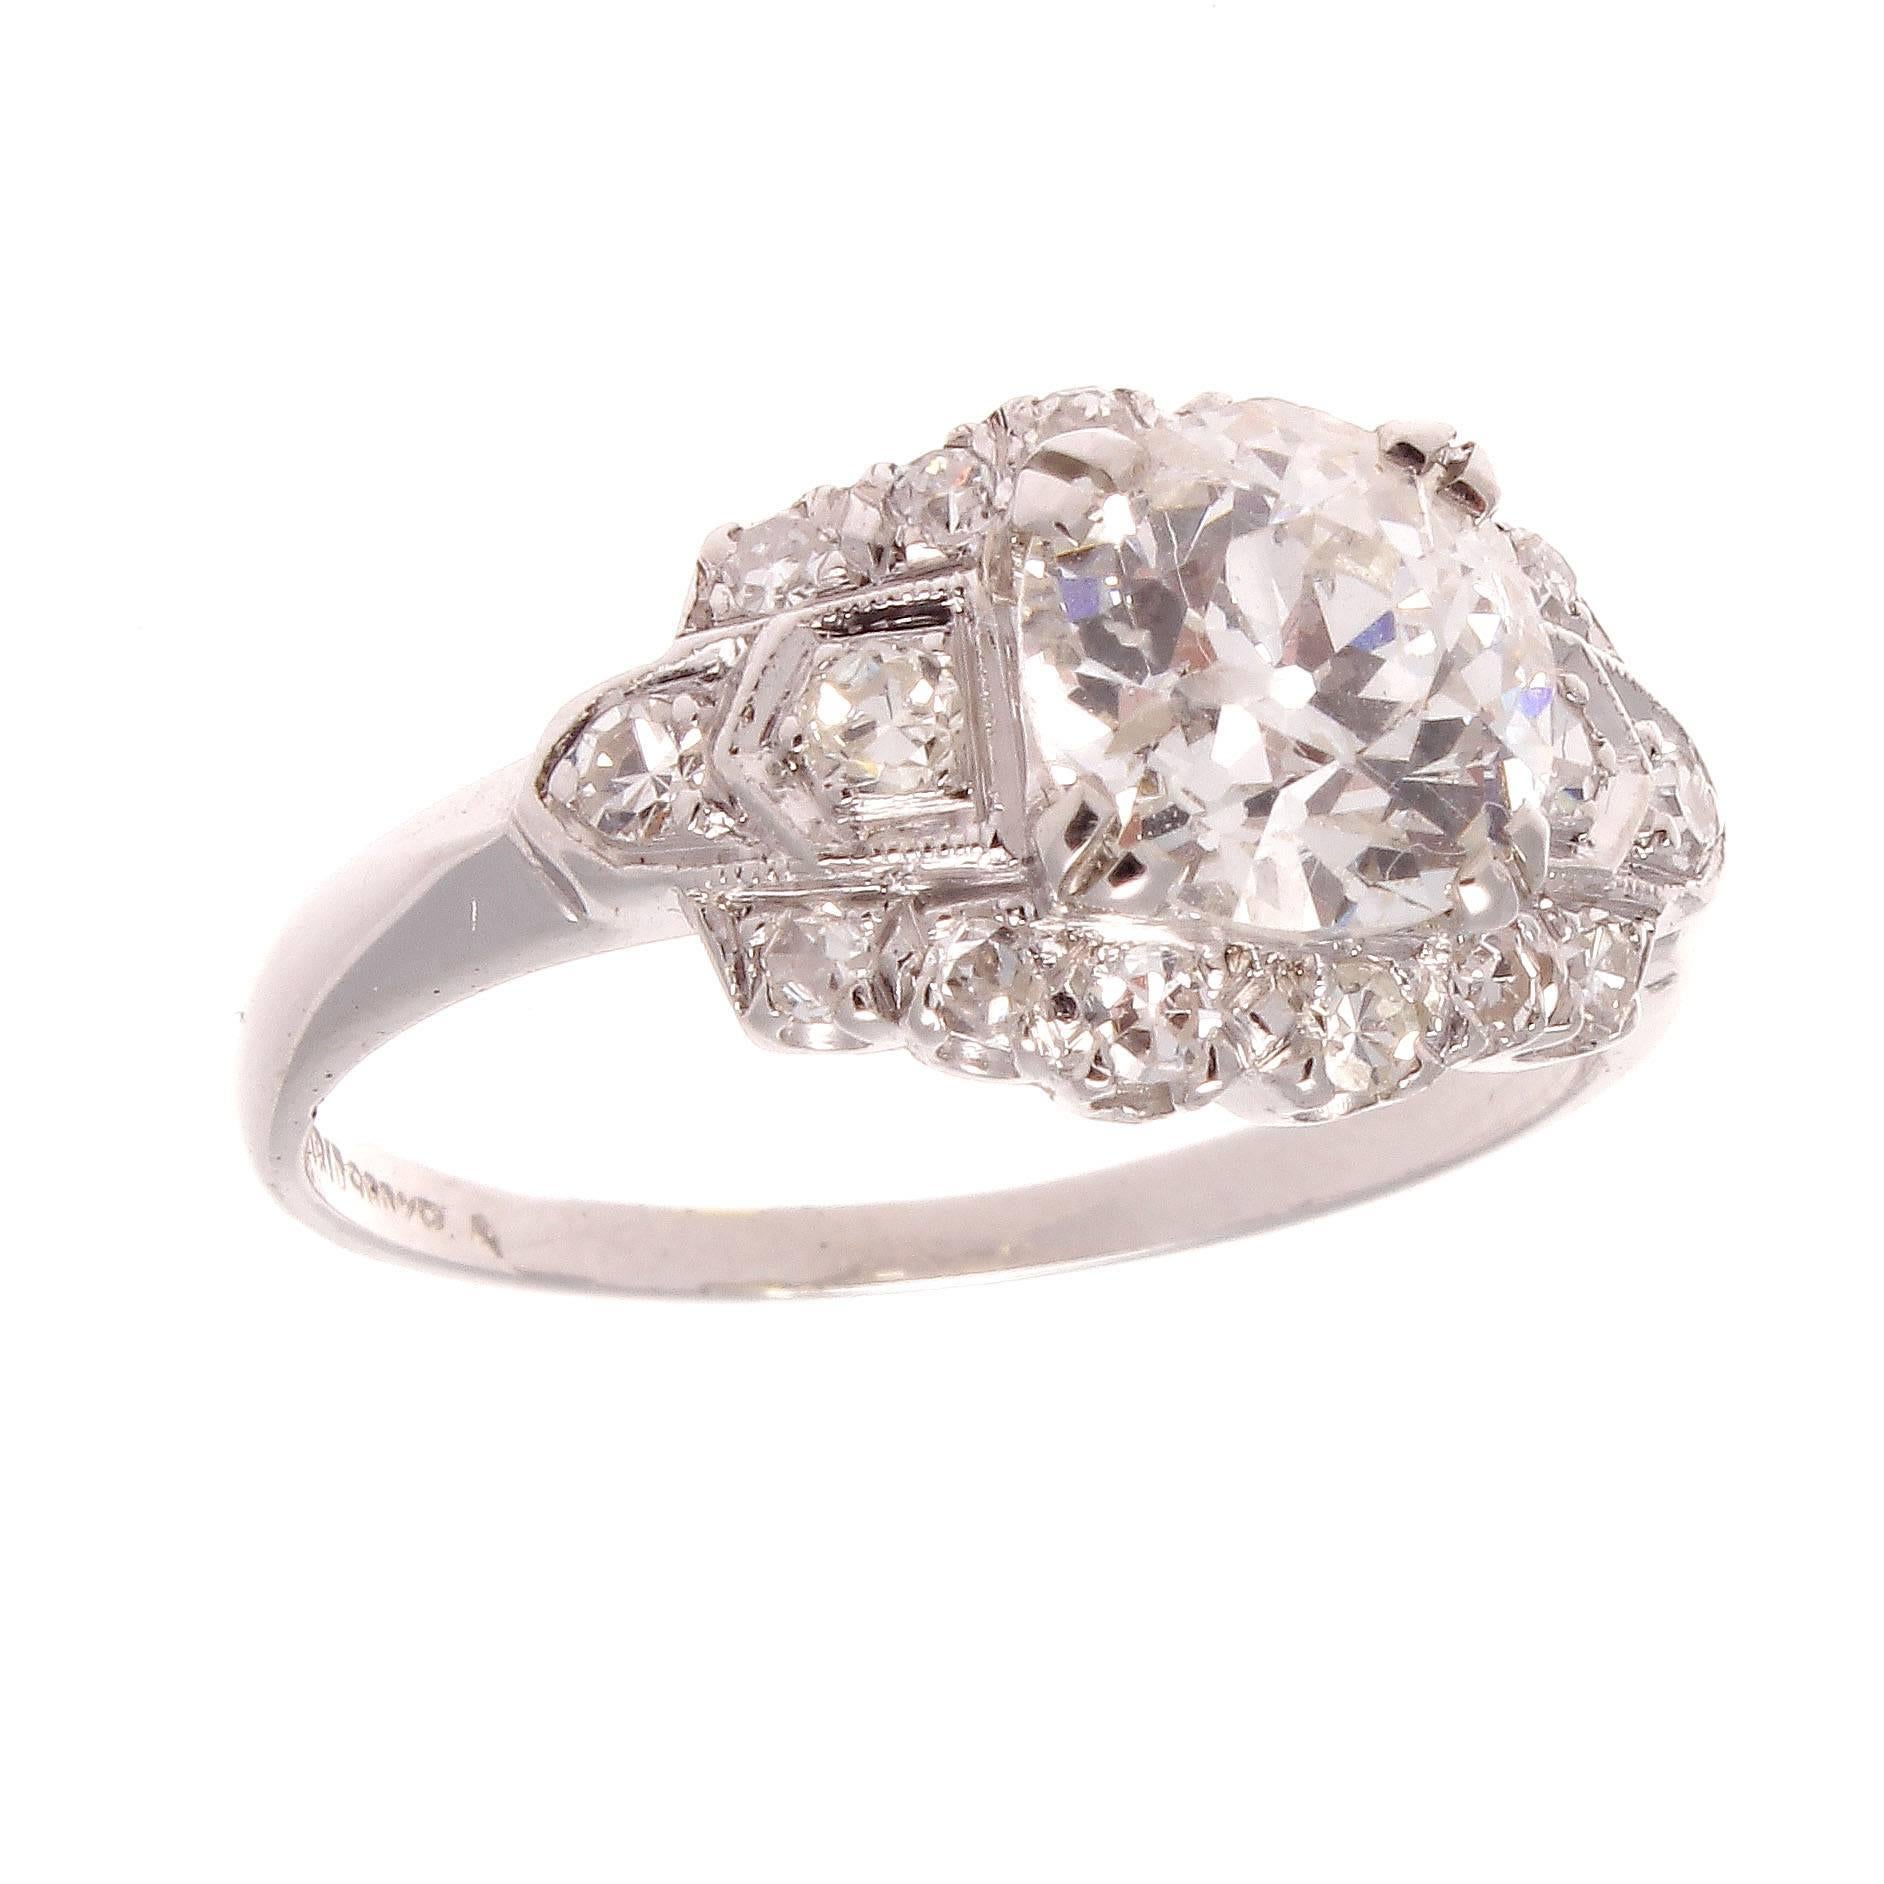 Unique symmetry along with a sense of elegance  created a time of luxurious extravagance  that is still unmatched.  Featuring a 1.16 carat old European cut diamond that is approximately H color, SI clarity and is surrounded by numerous colorless